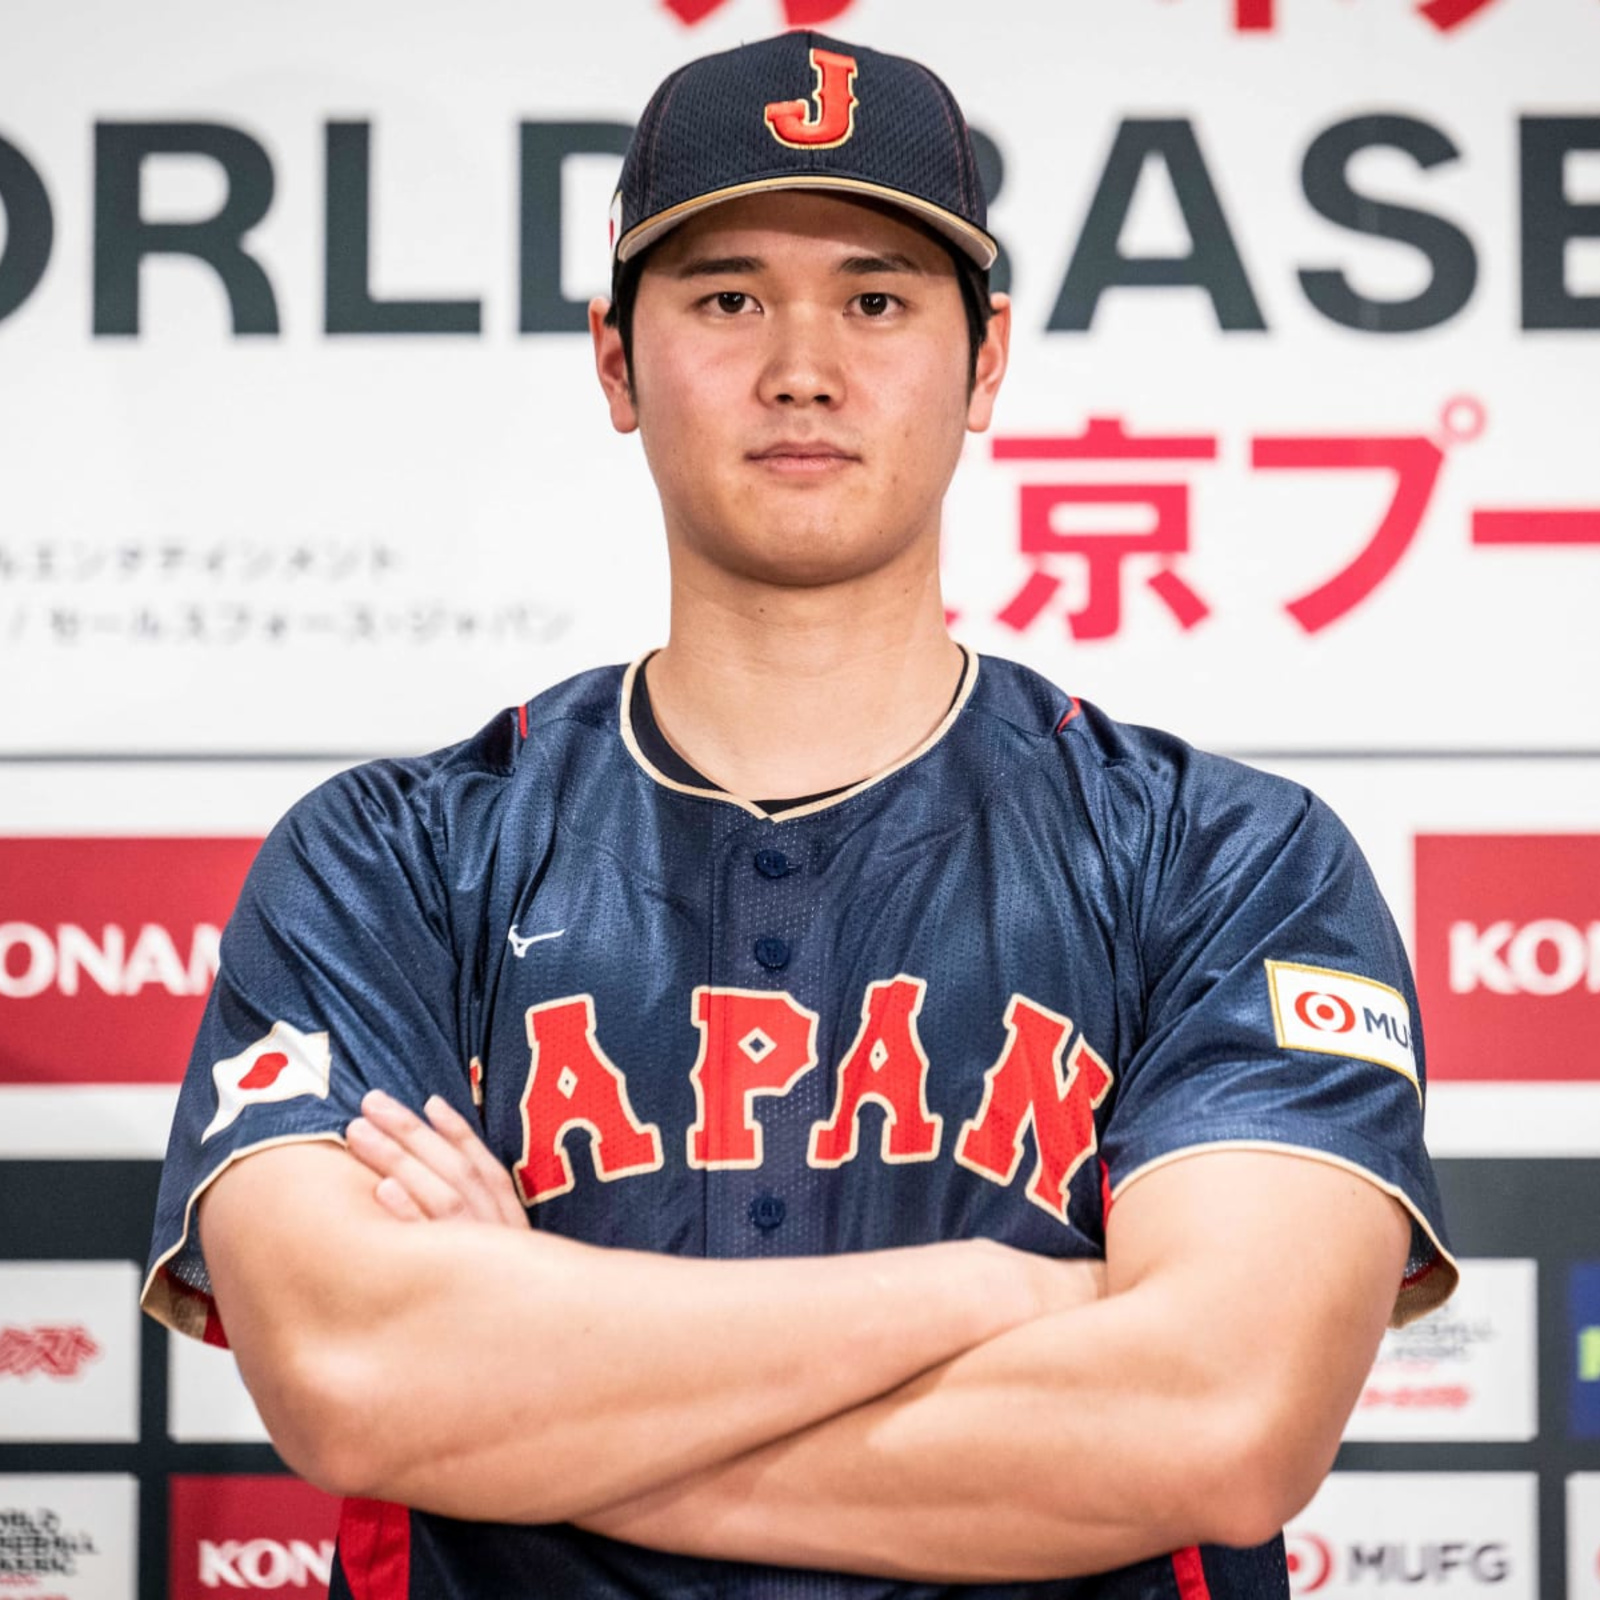 Ohtani leads Japan to WBC win over China with arm, bat